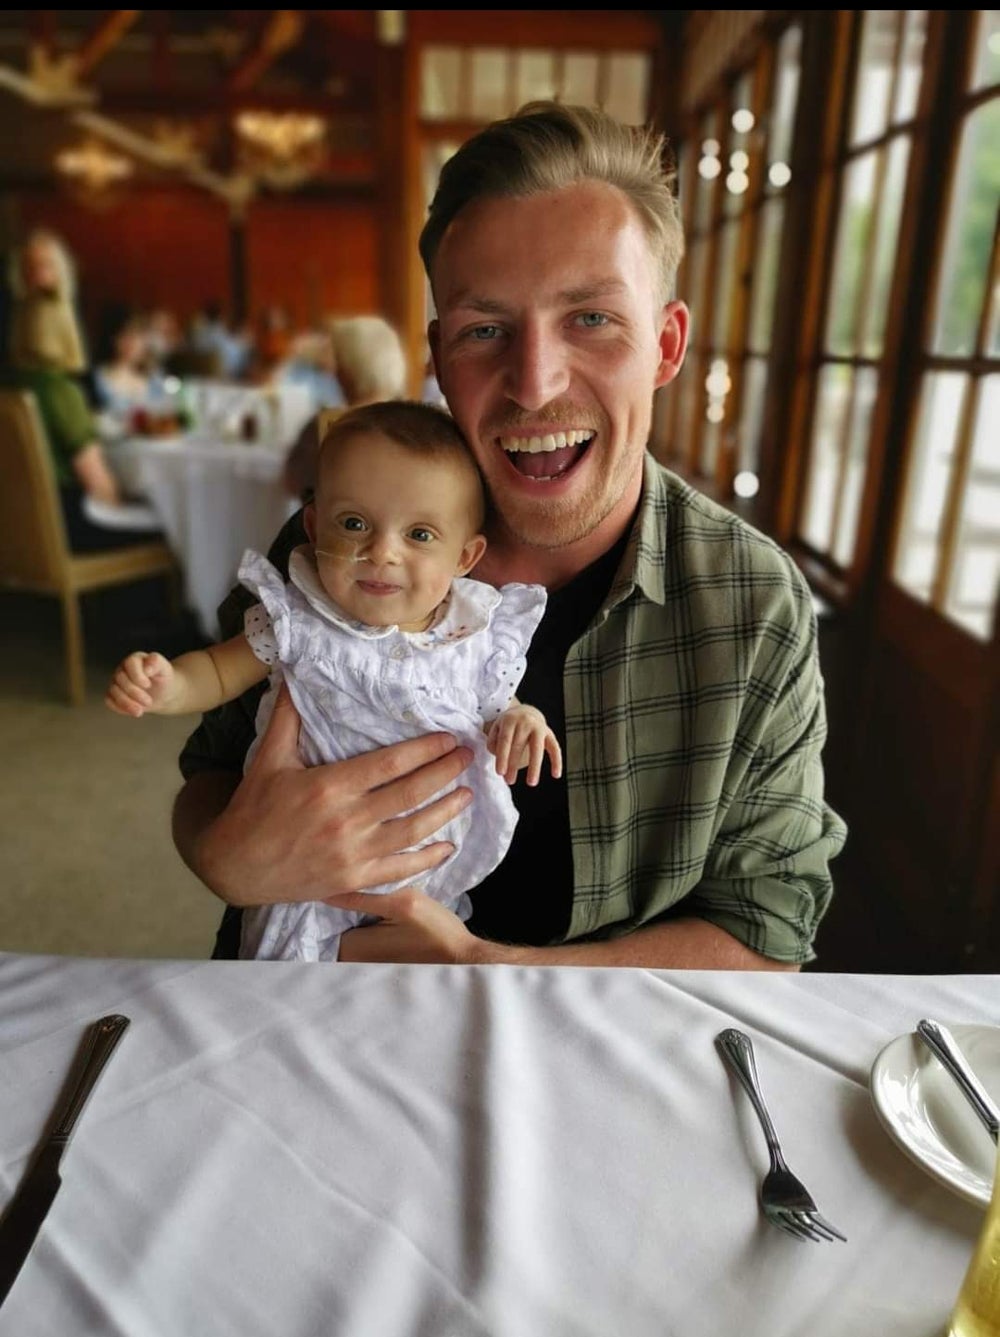 Joe Kean with his daughter Aria (Collect/PA Real Life)